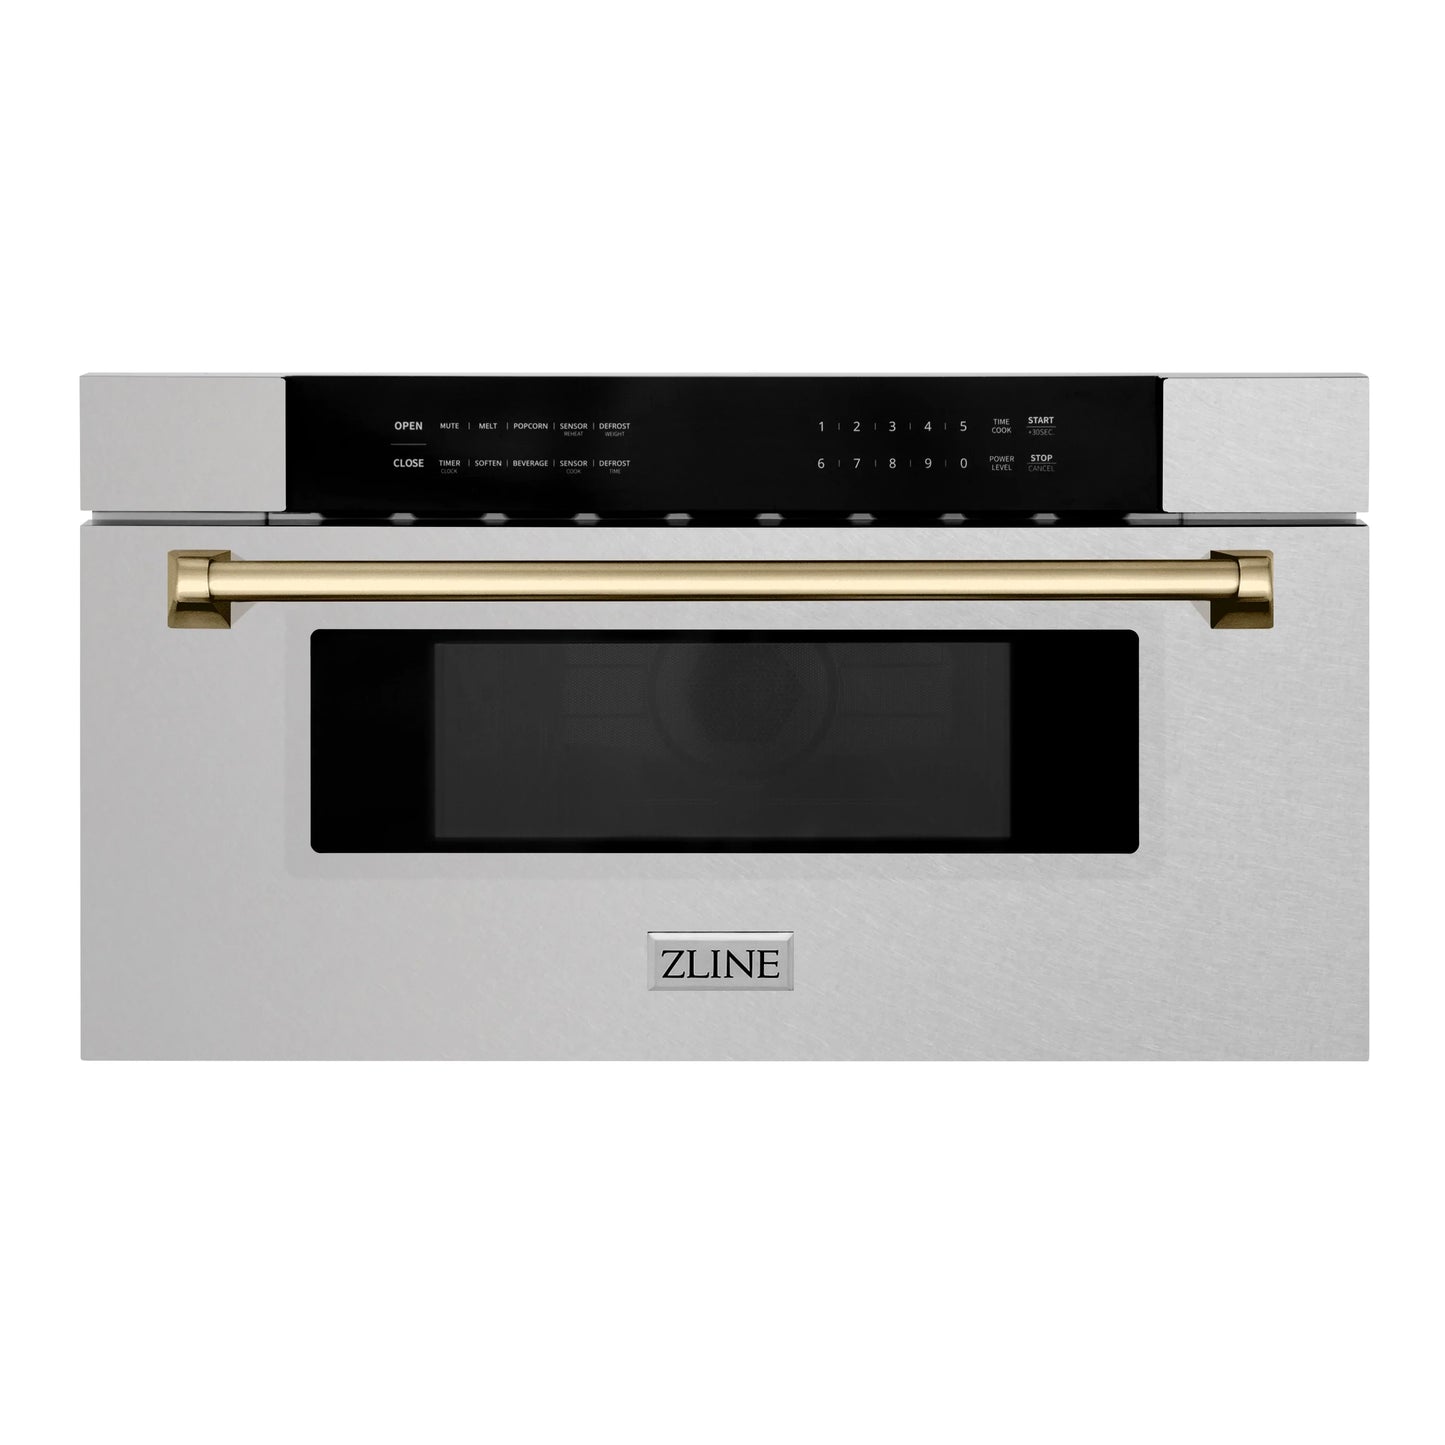 ZLINE Autograph Edition 30"  Built-In Microwave Drawer in Fingerprint Resistant Stainless Steel with Accents